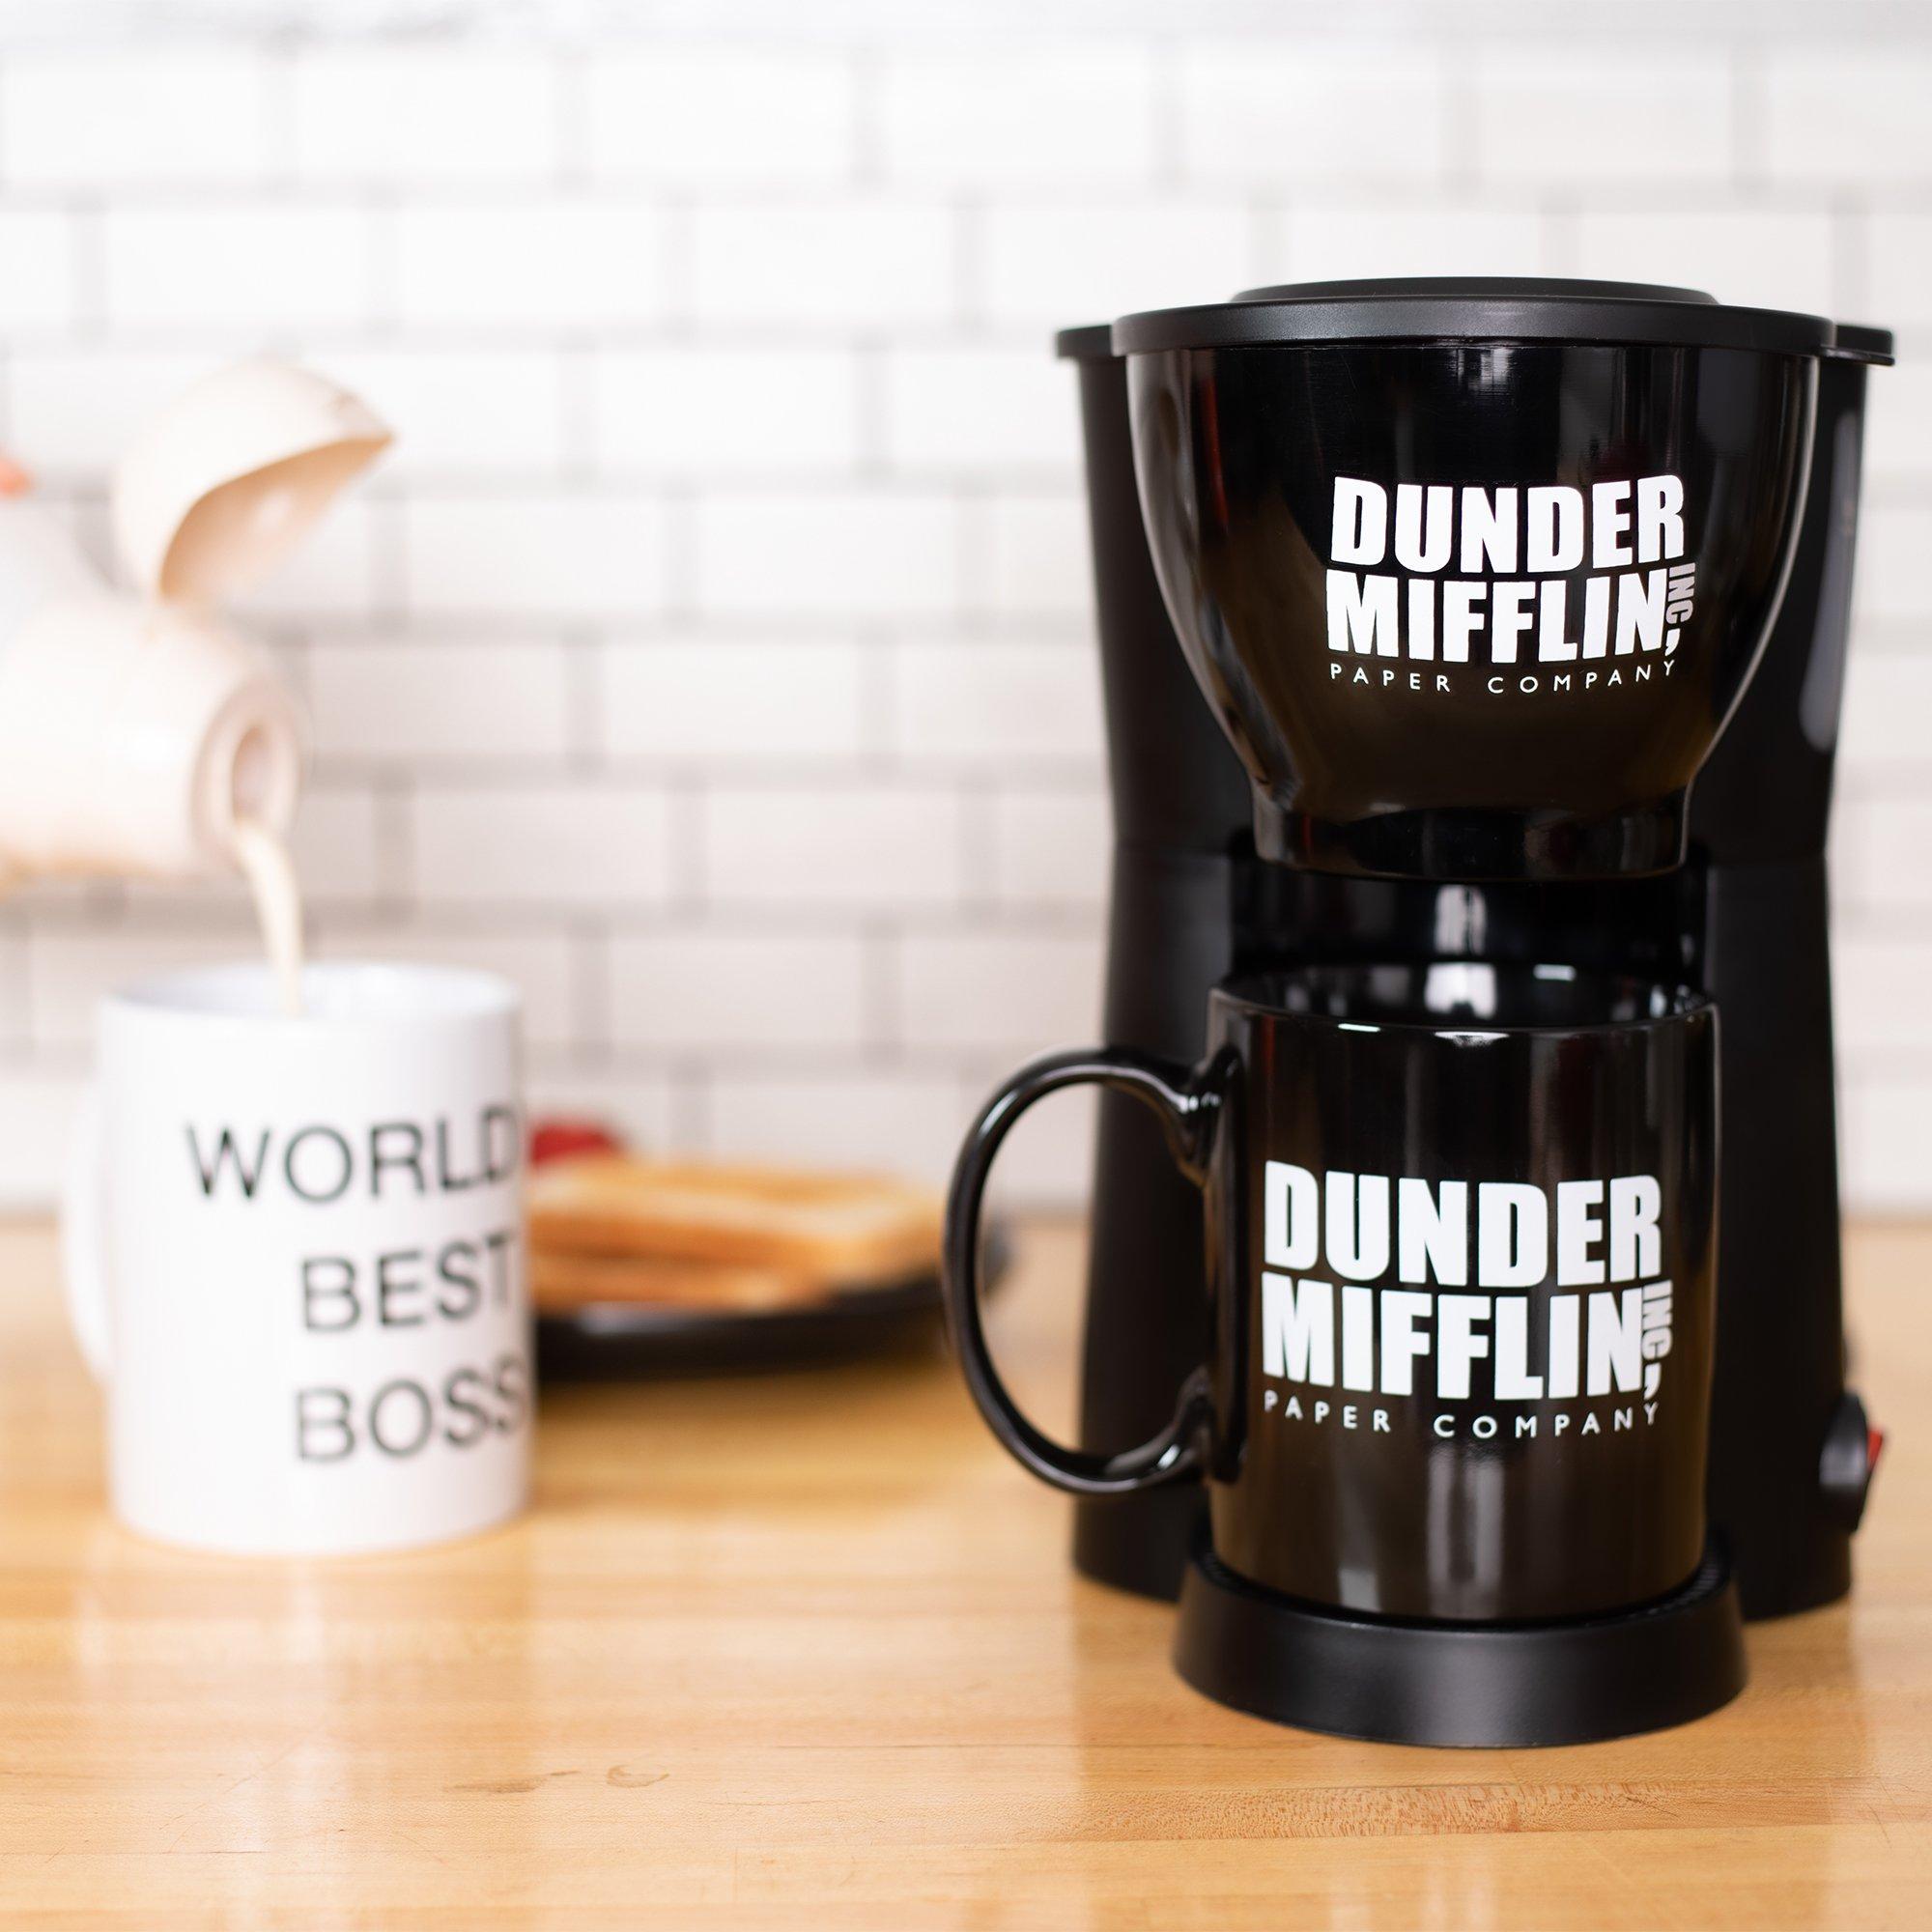 https://media.gamestop.com/i/gamestop/20005582_ALT05/The-Office-Single-Cup-Coffee-Maker-Gift-Set-with-2-Mugs?$pdp$